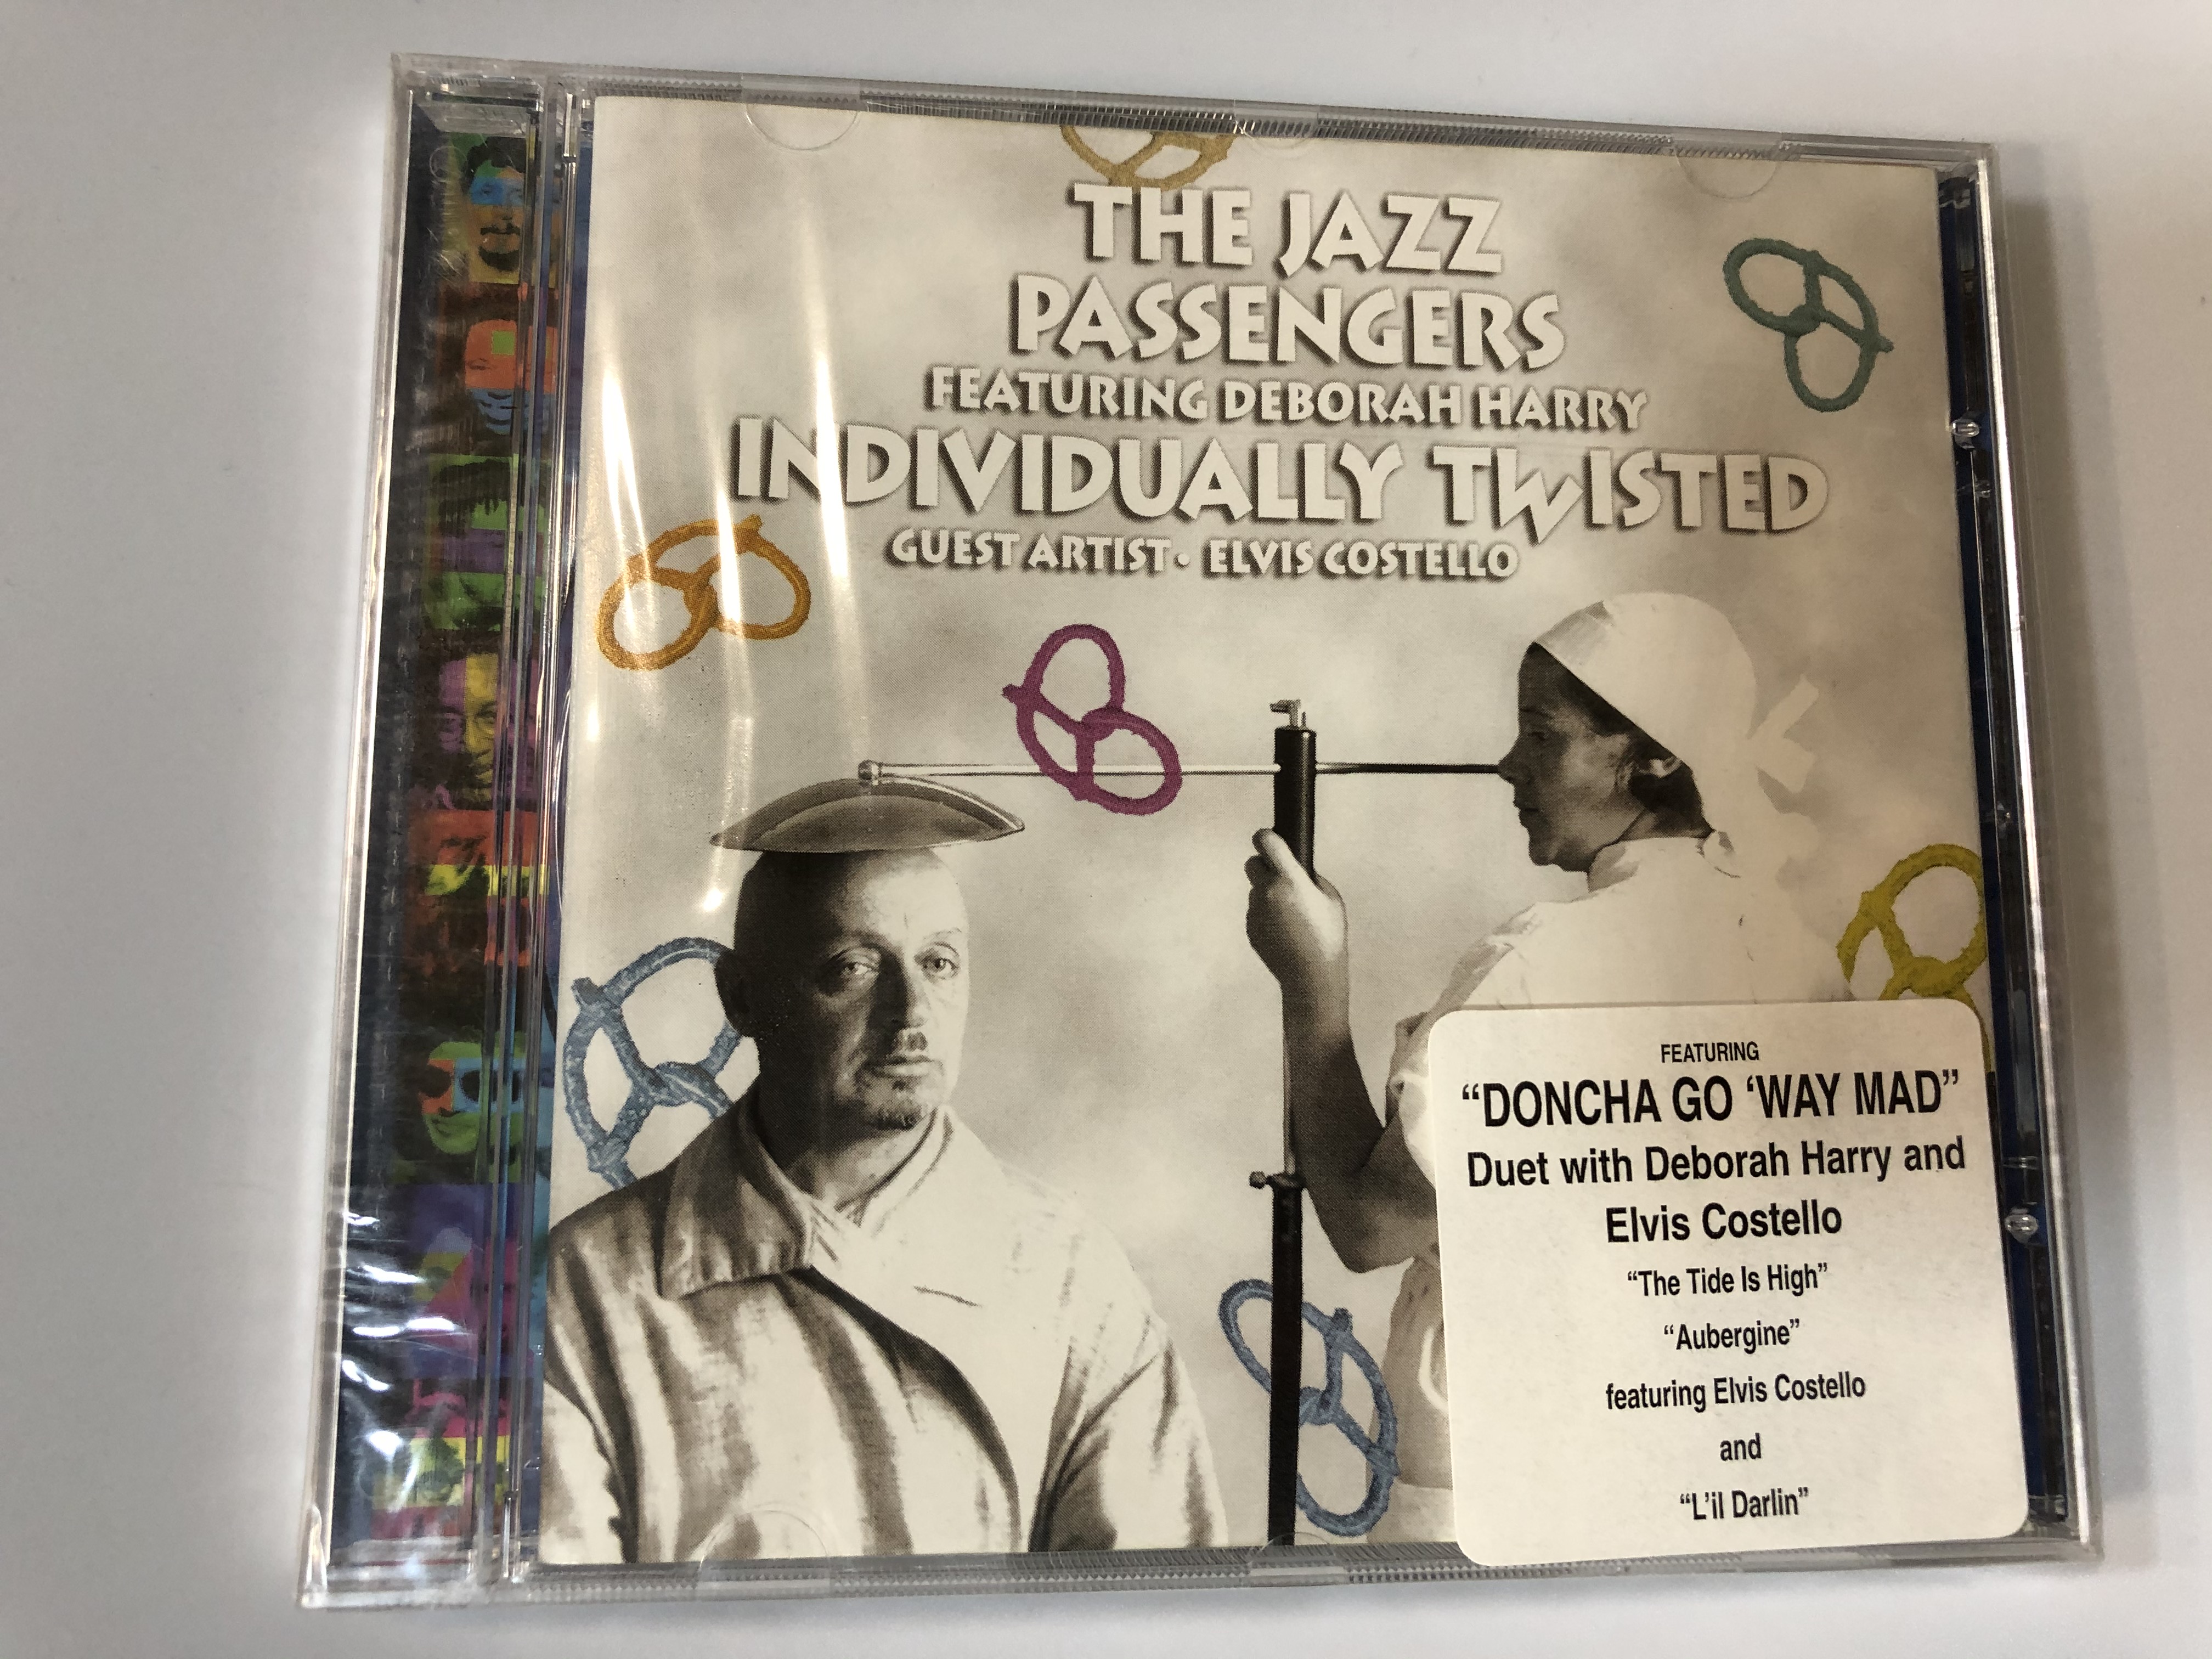 the-jazz-passengers-featuring-deborah-harry-guest-artist-elvis-costello-individually-twisted-featuring-doncha-go-way-mad-duet-with-deborah-harry-castle-communications-audio-cd-19-1-.jpg